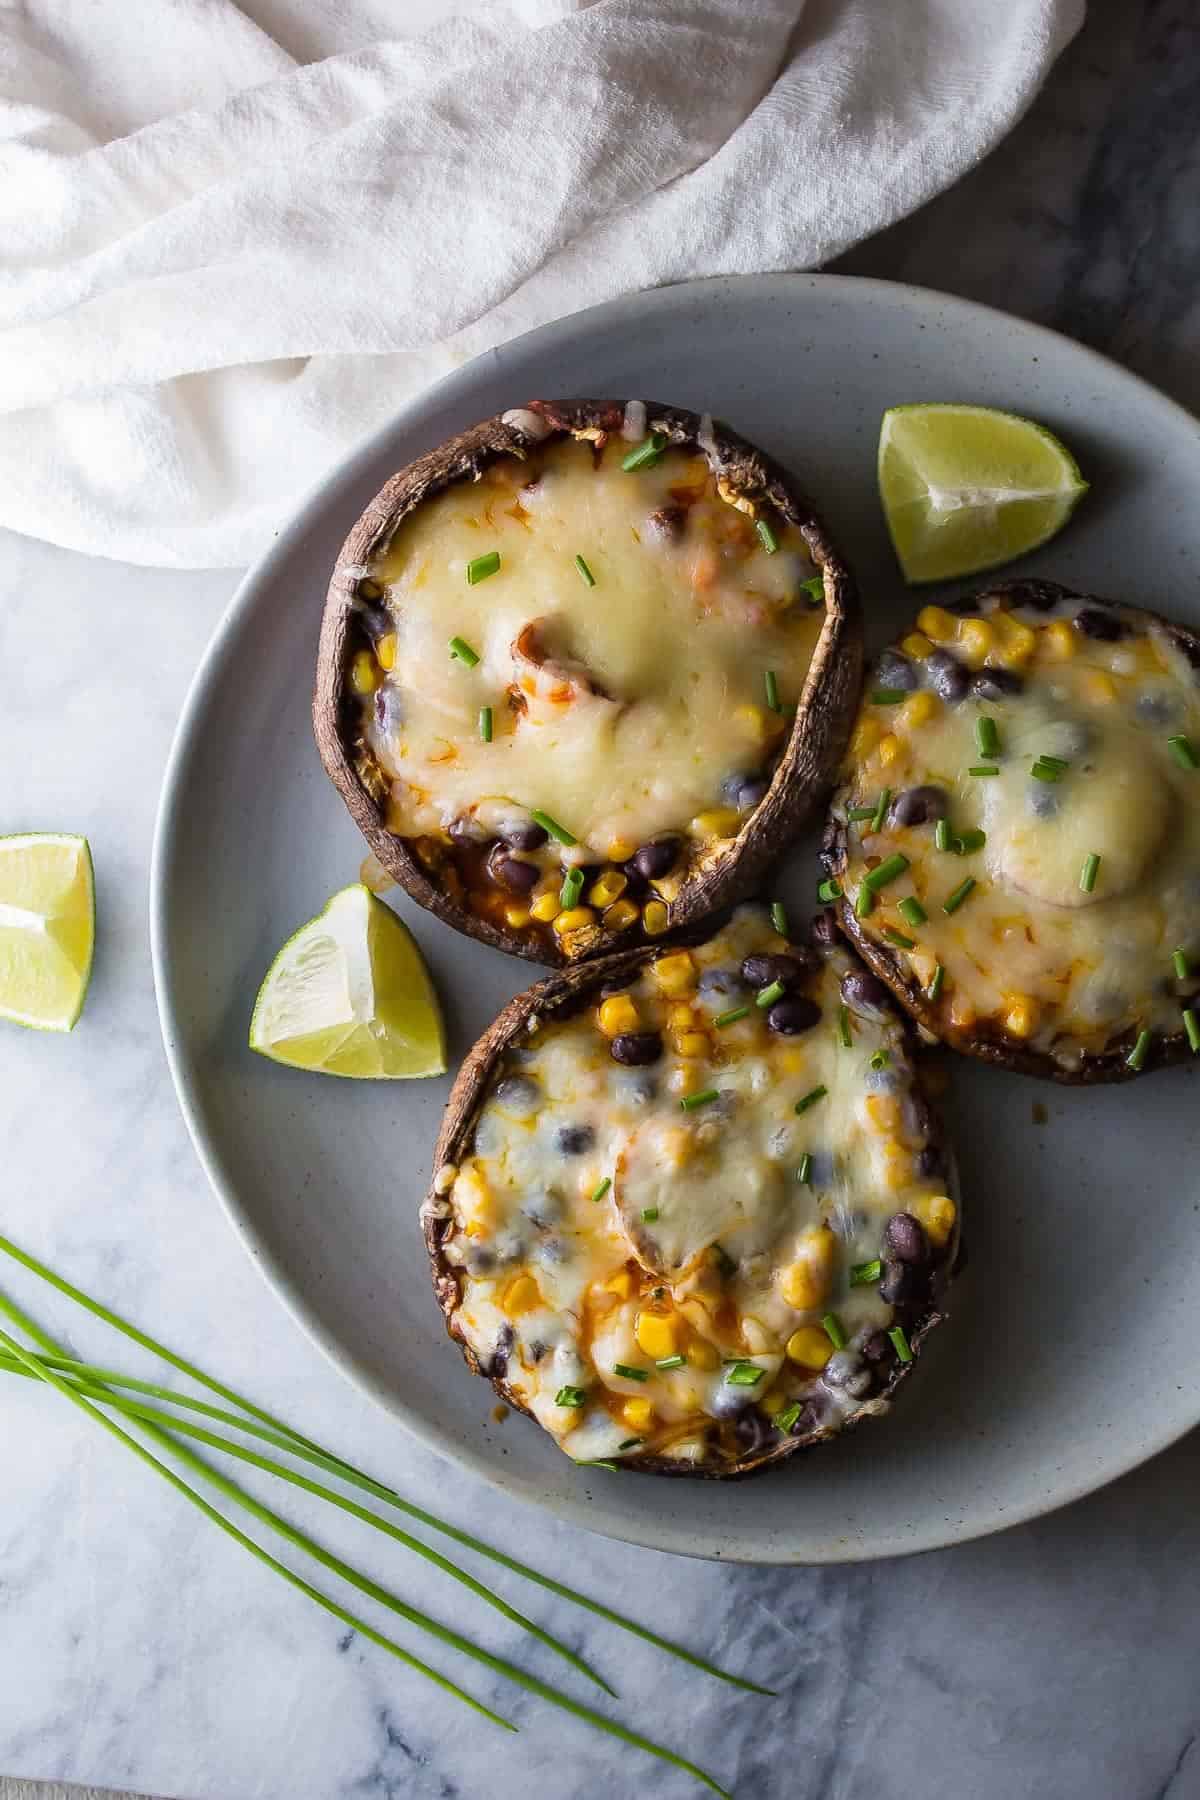 Three Enchilada Stuffed Grilled Portobello Mushrooms plated with chives and lime slices